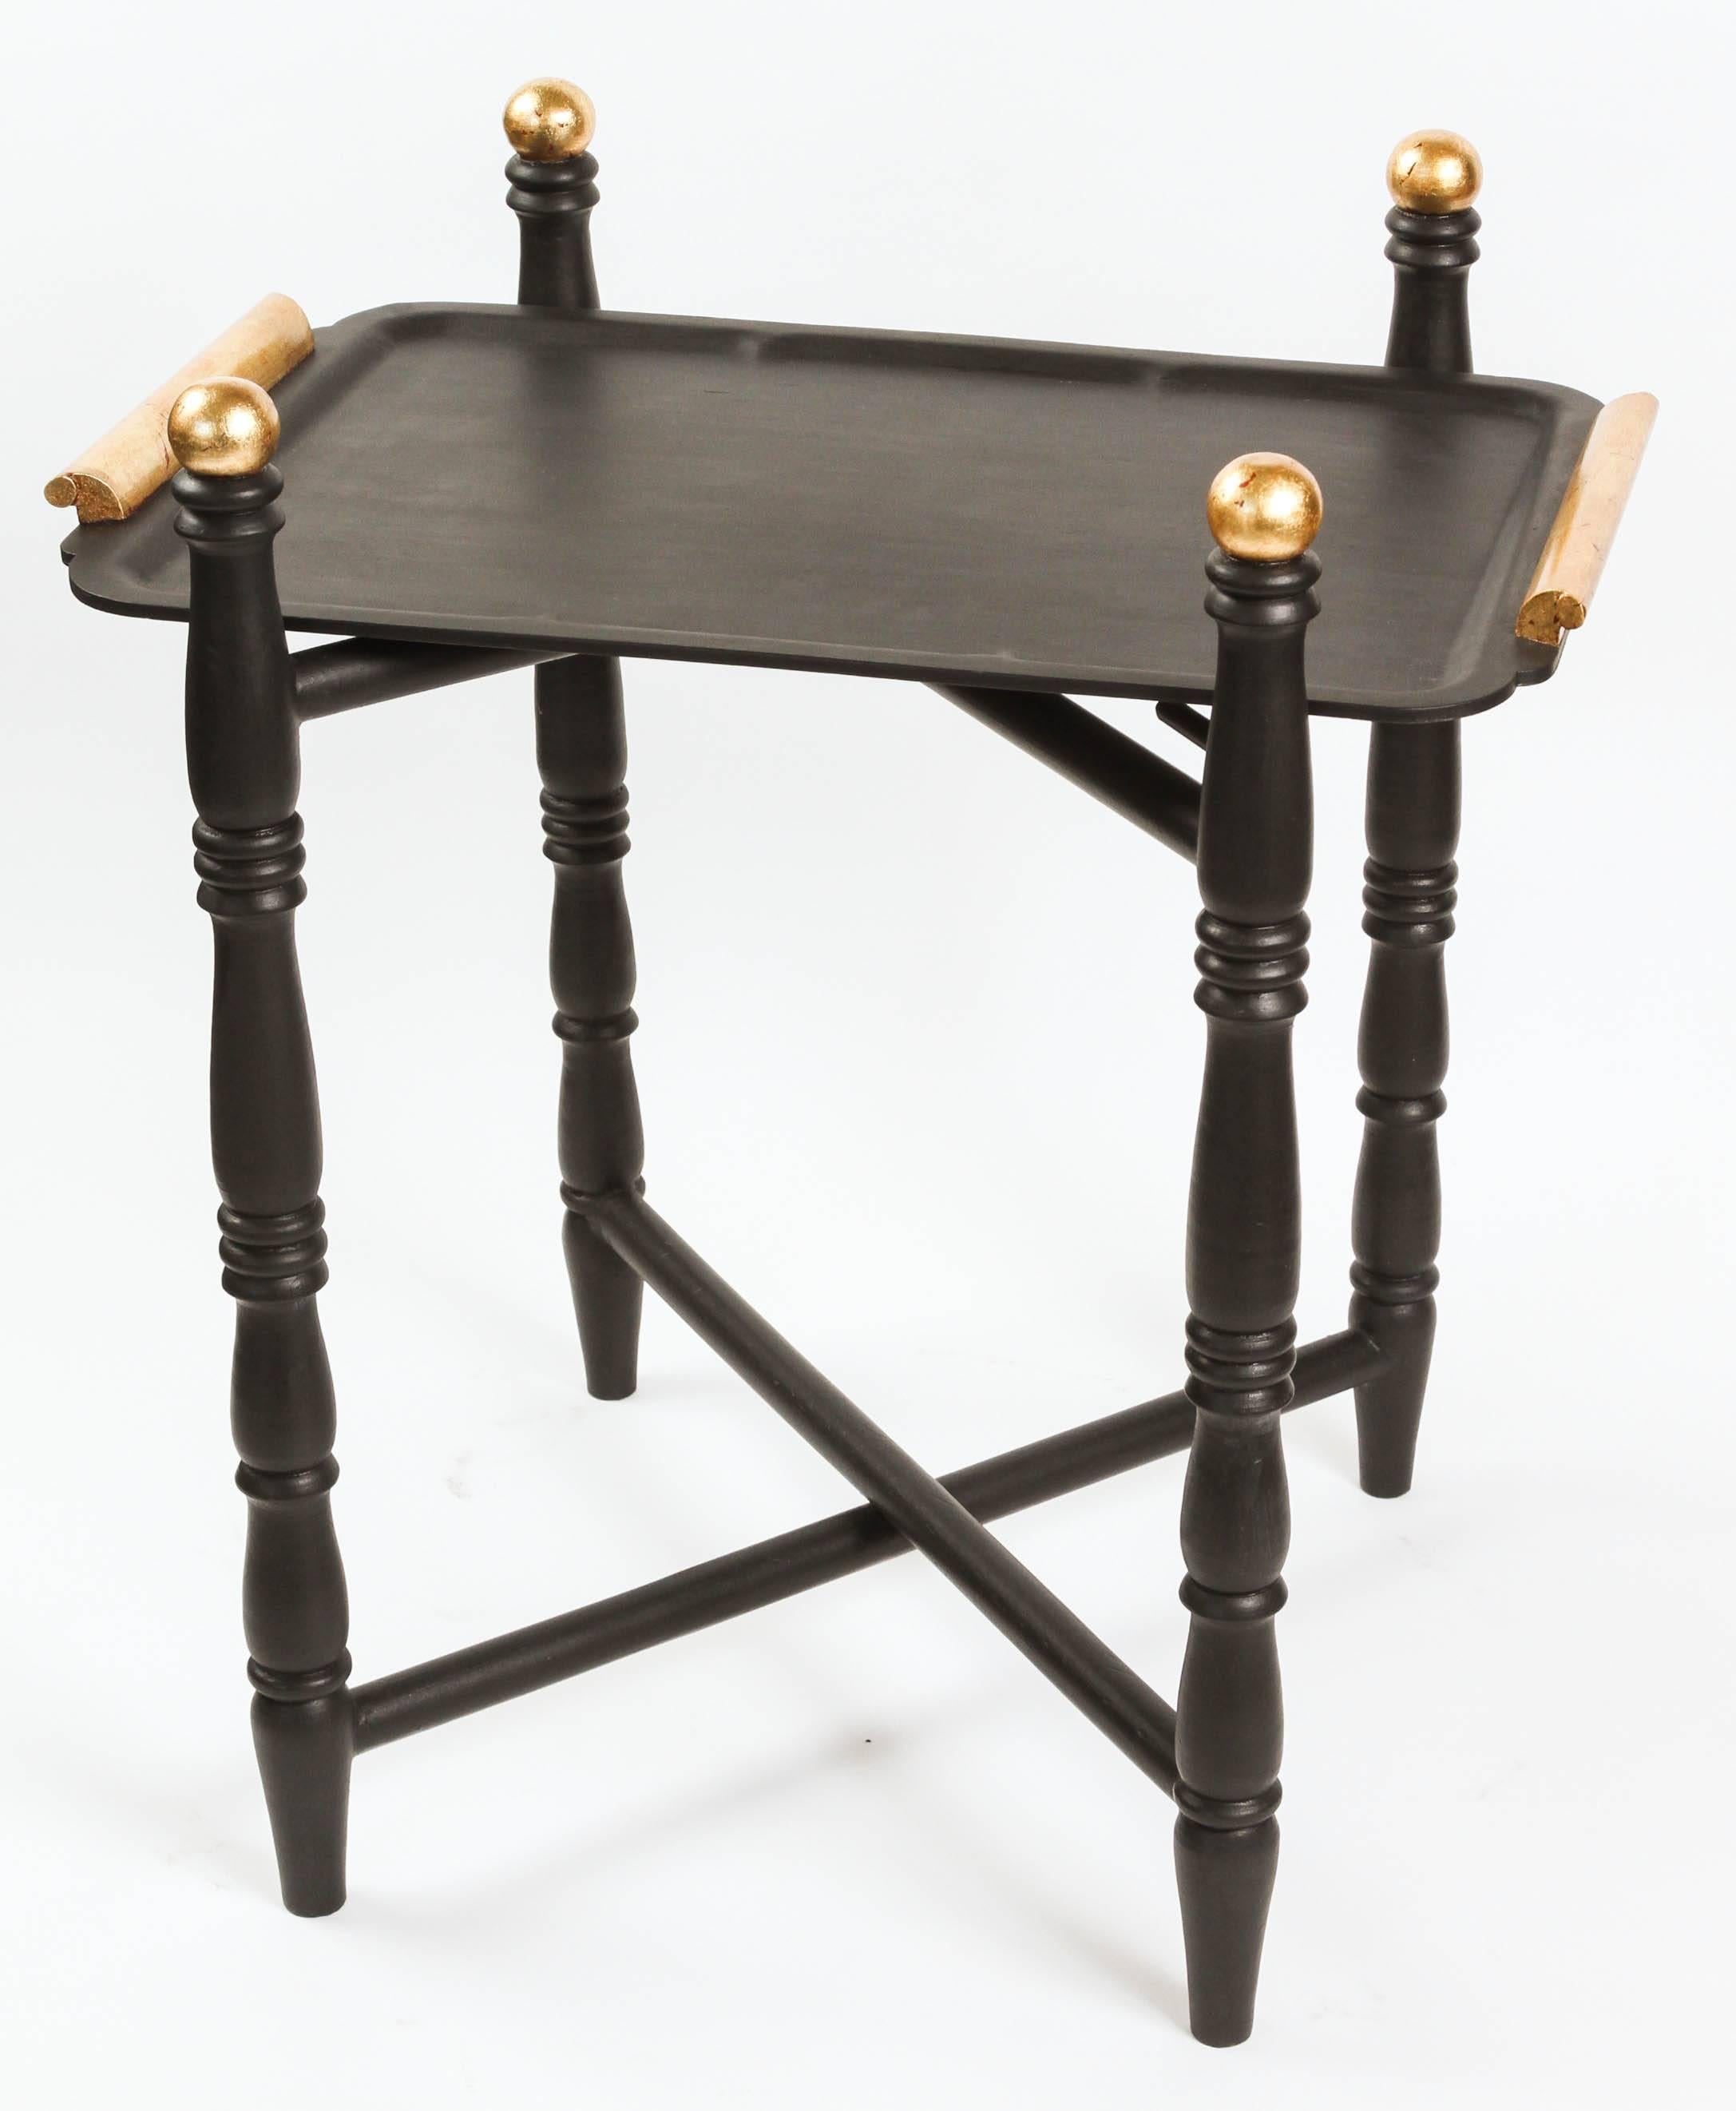 Vintage folding wood tray table newly painted in matte black and gold leaf.

Tray: W 22.25 x L 14.5 x H 1.5.